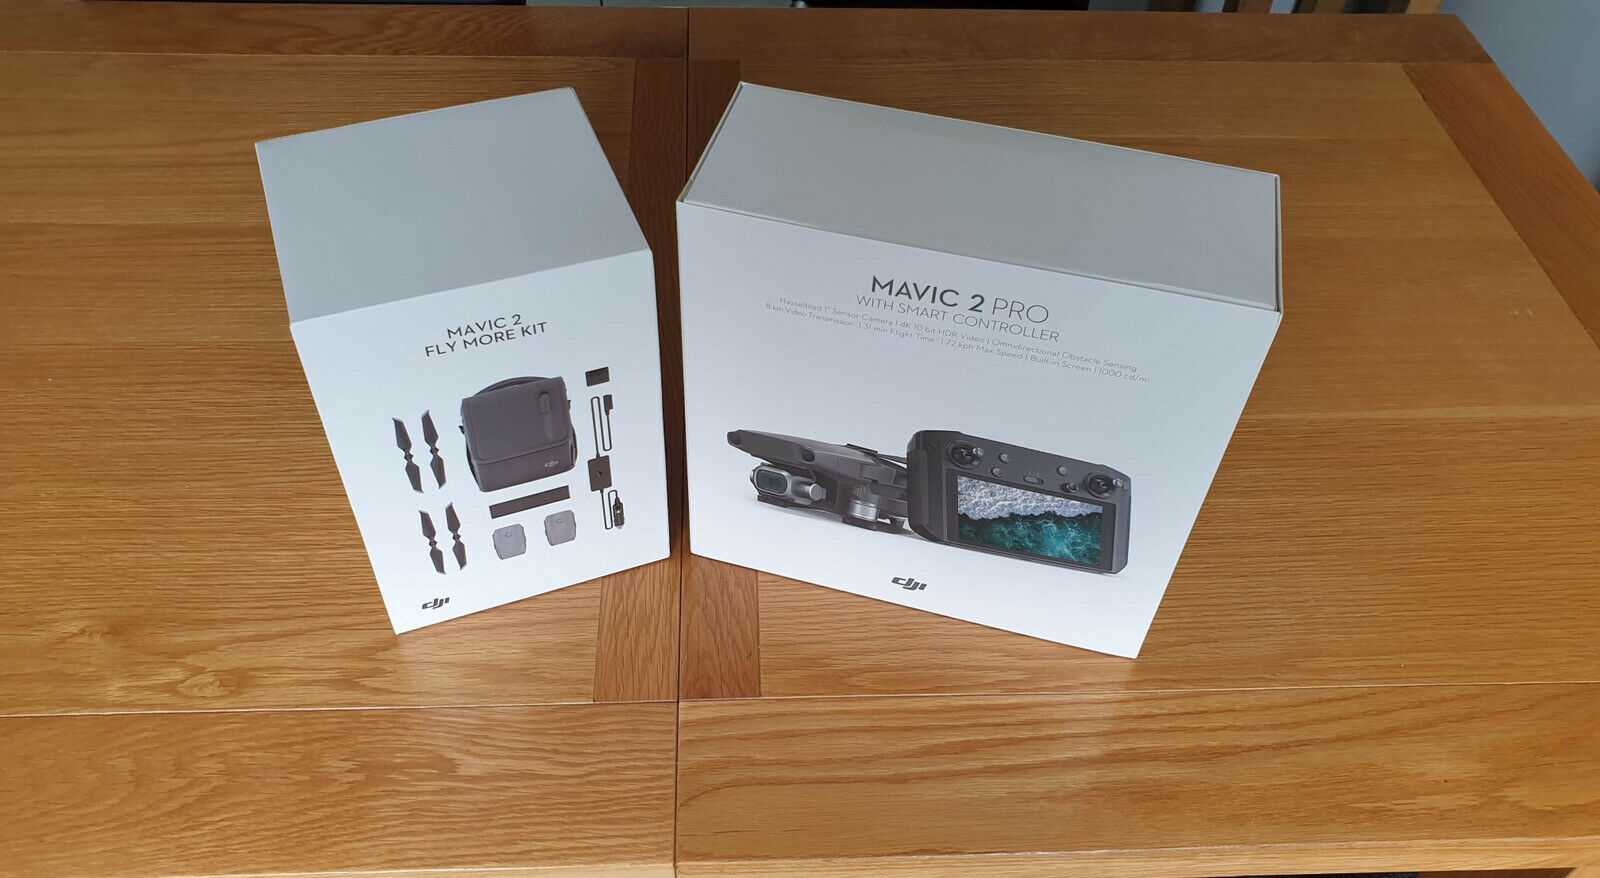 DJi Mavic 2 Pro with Smart Controller and fly More combo Kit